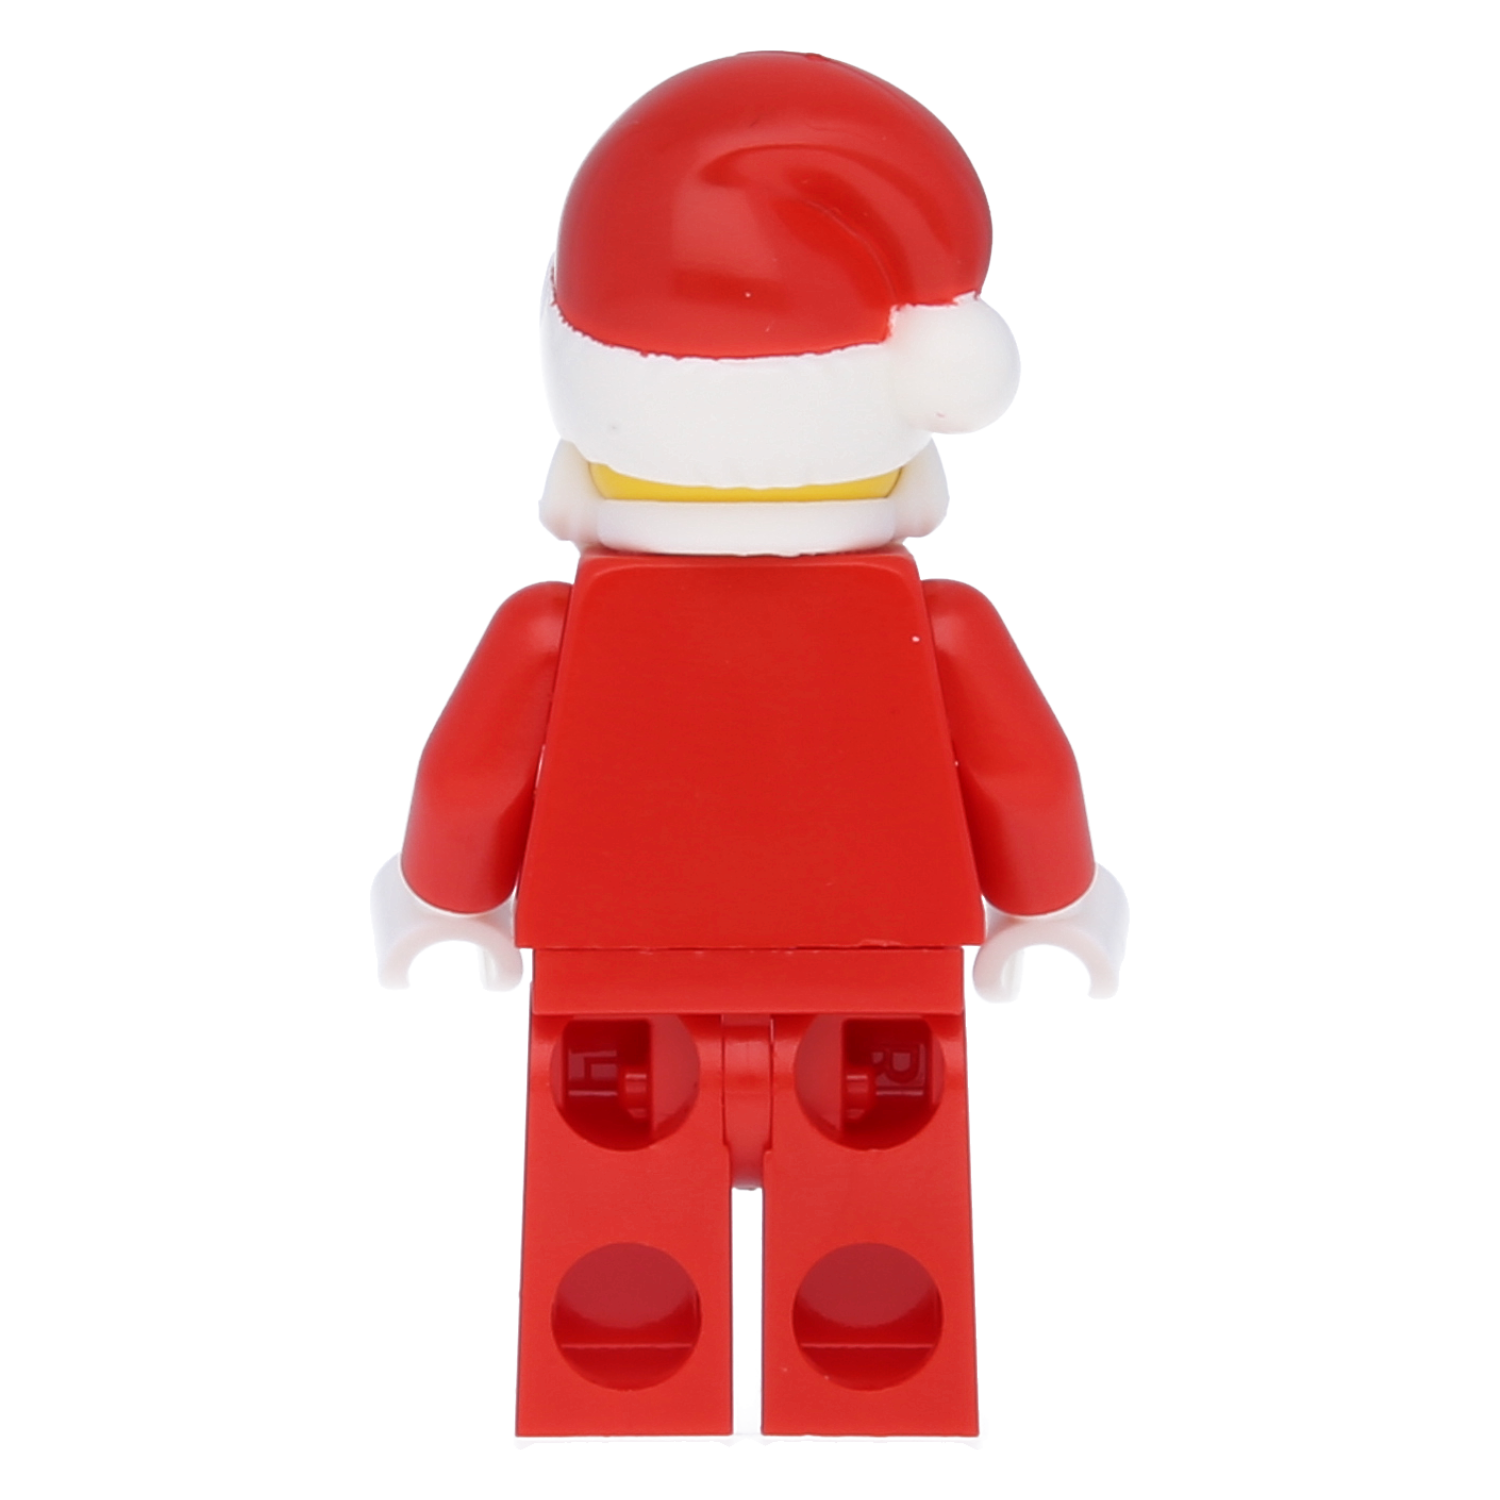 LEGO Minifigure - Santa Claus with Bart and hat (series 8)